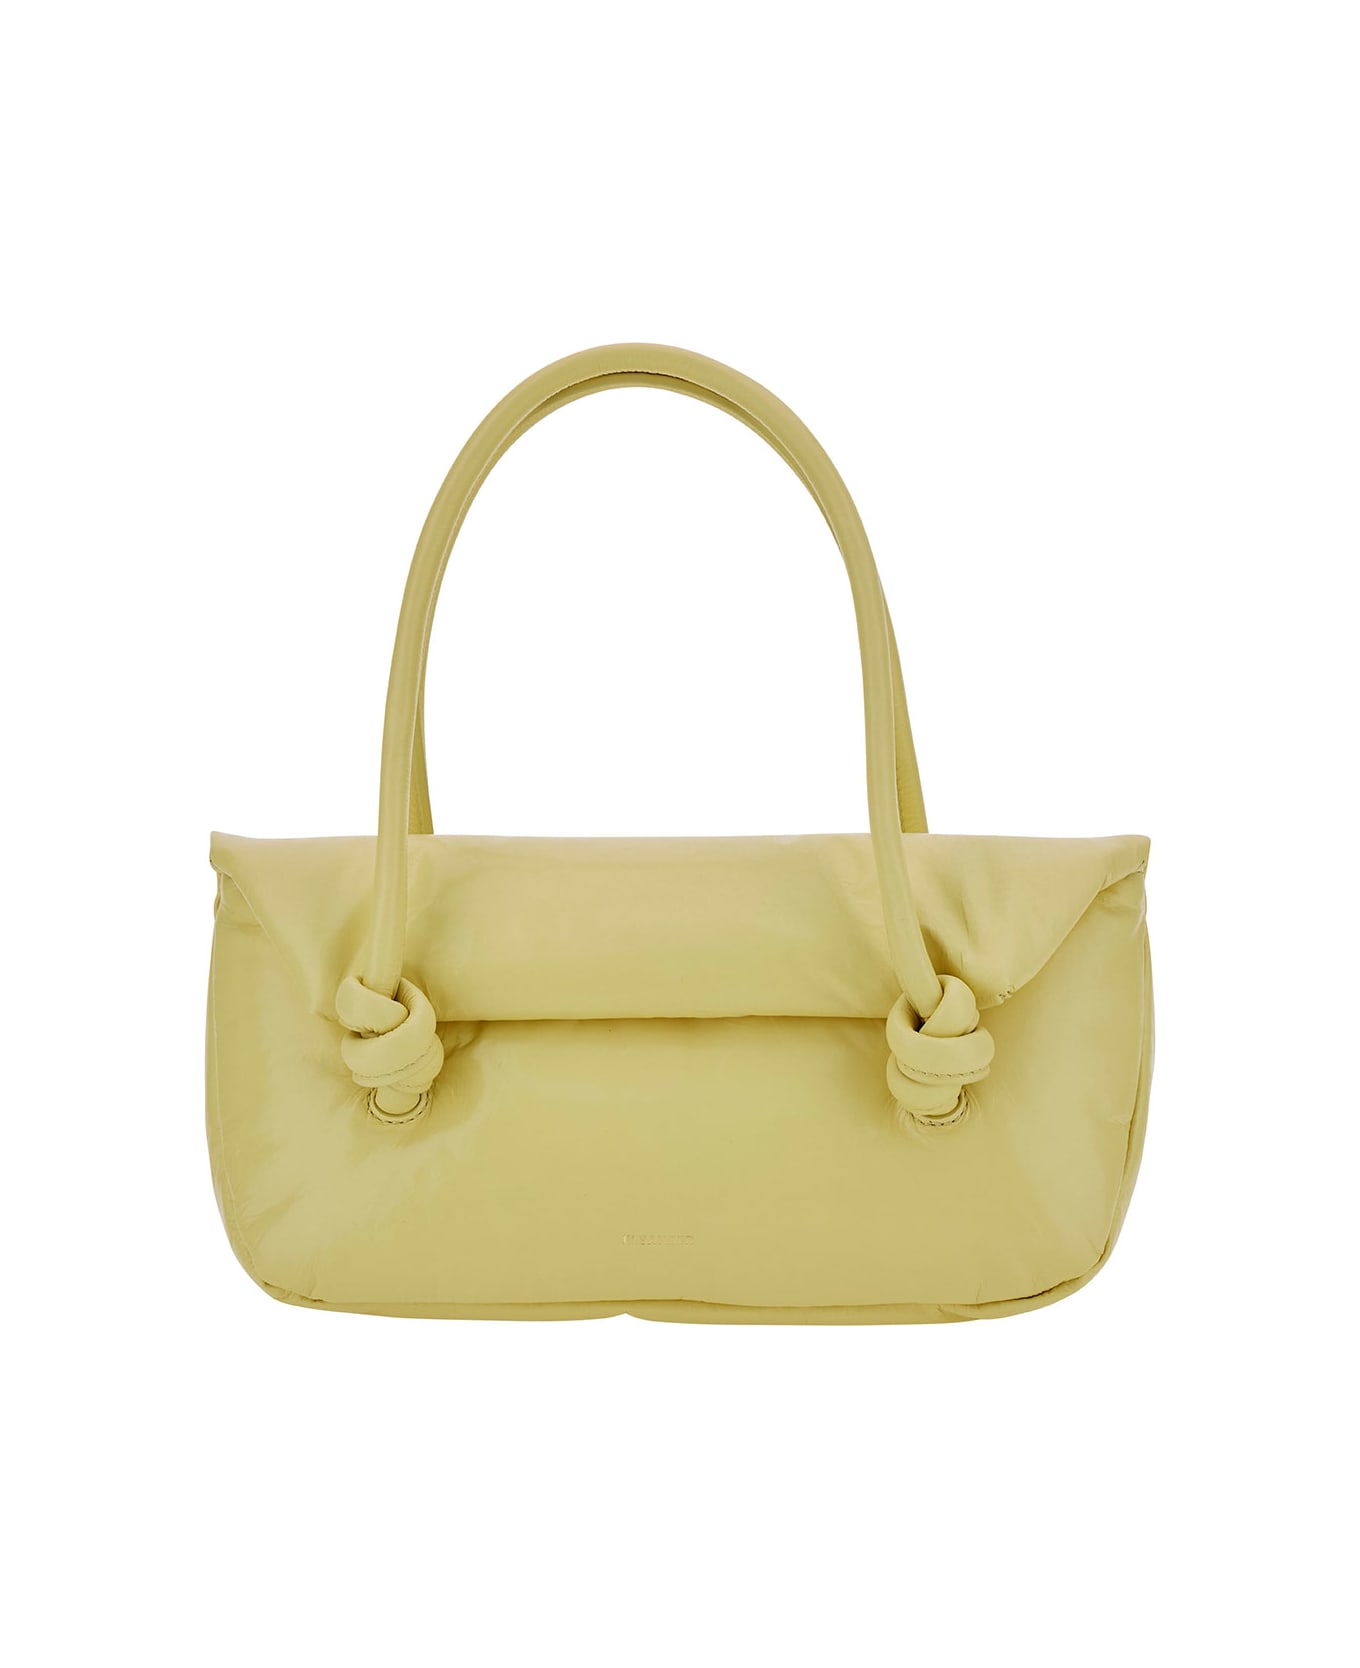 Jil Sander 'knot Small' Yellow Shoulder Bag With Laminated Logo In Patent Leather Woman - Yellow ショルダーバッグ